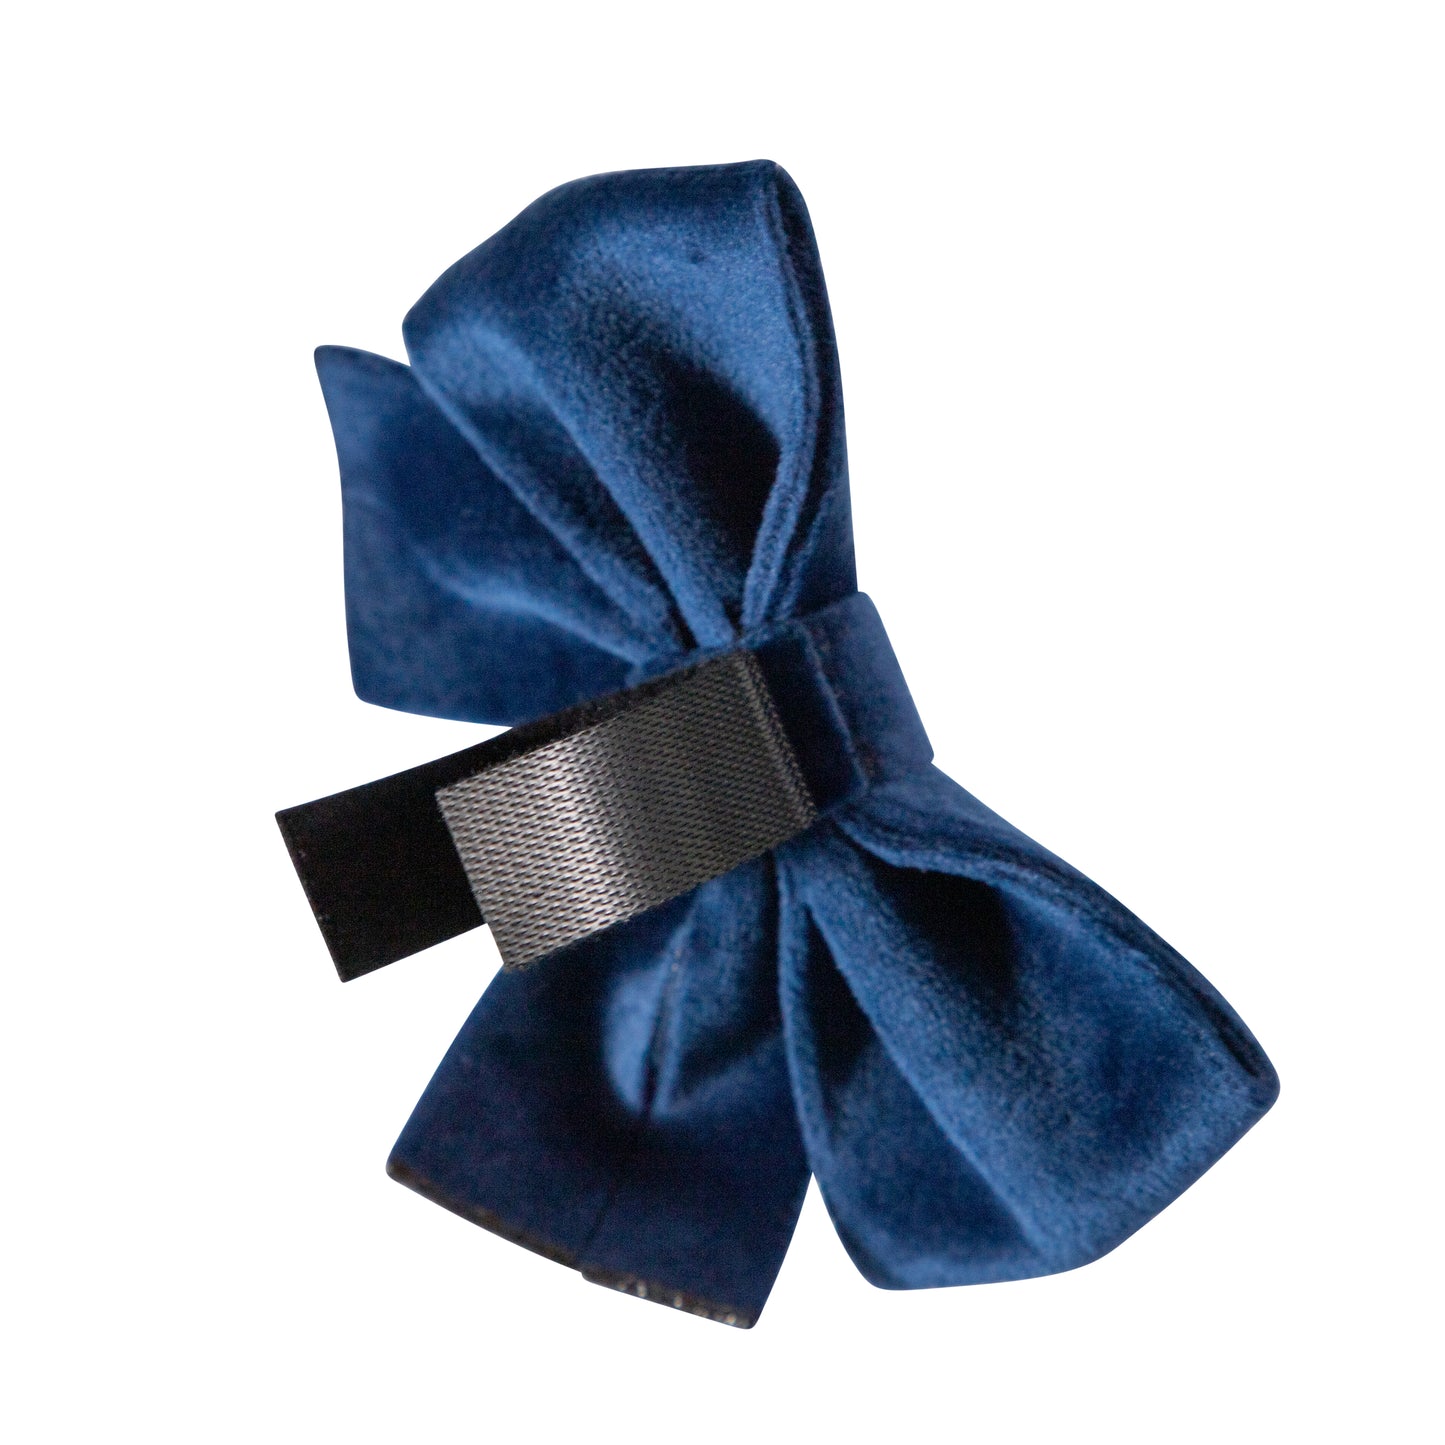 Royal Velvet Harness, Collar and Bow Tie